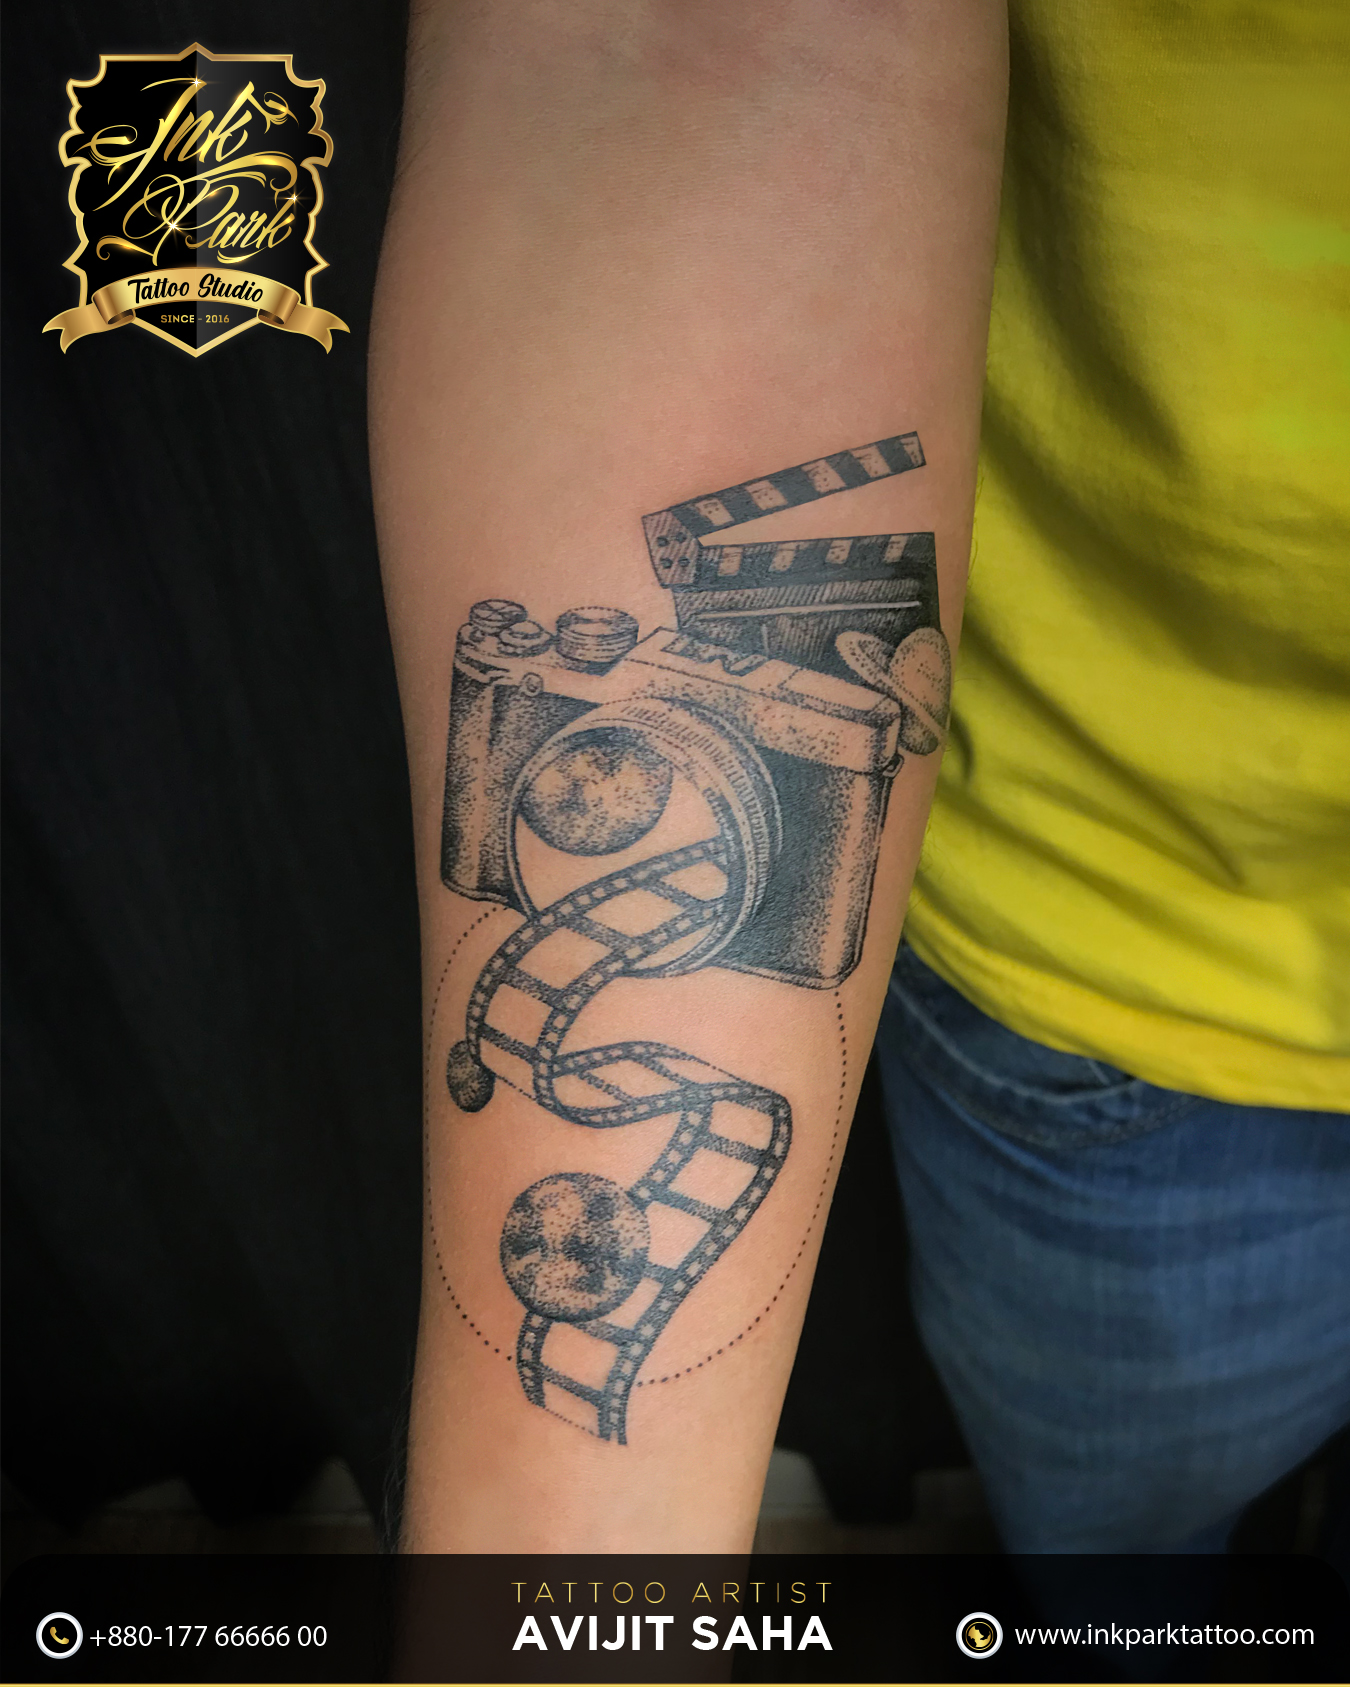 Film camera tattoo on the ankle